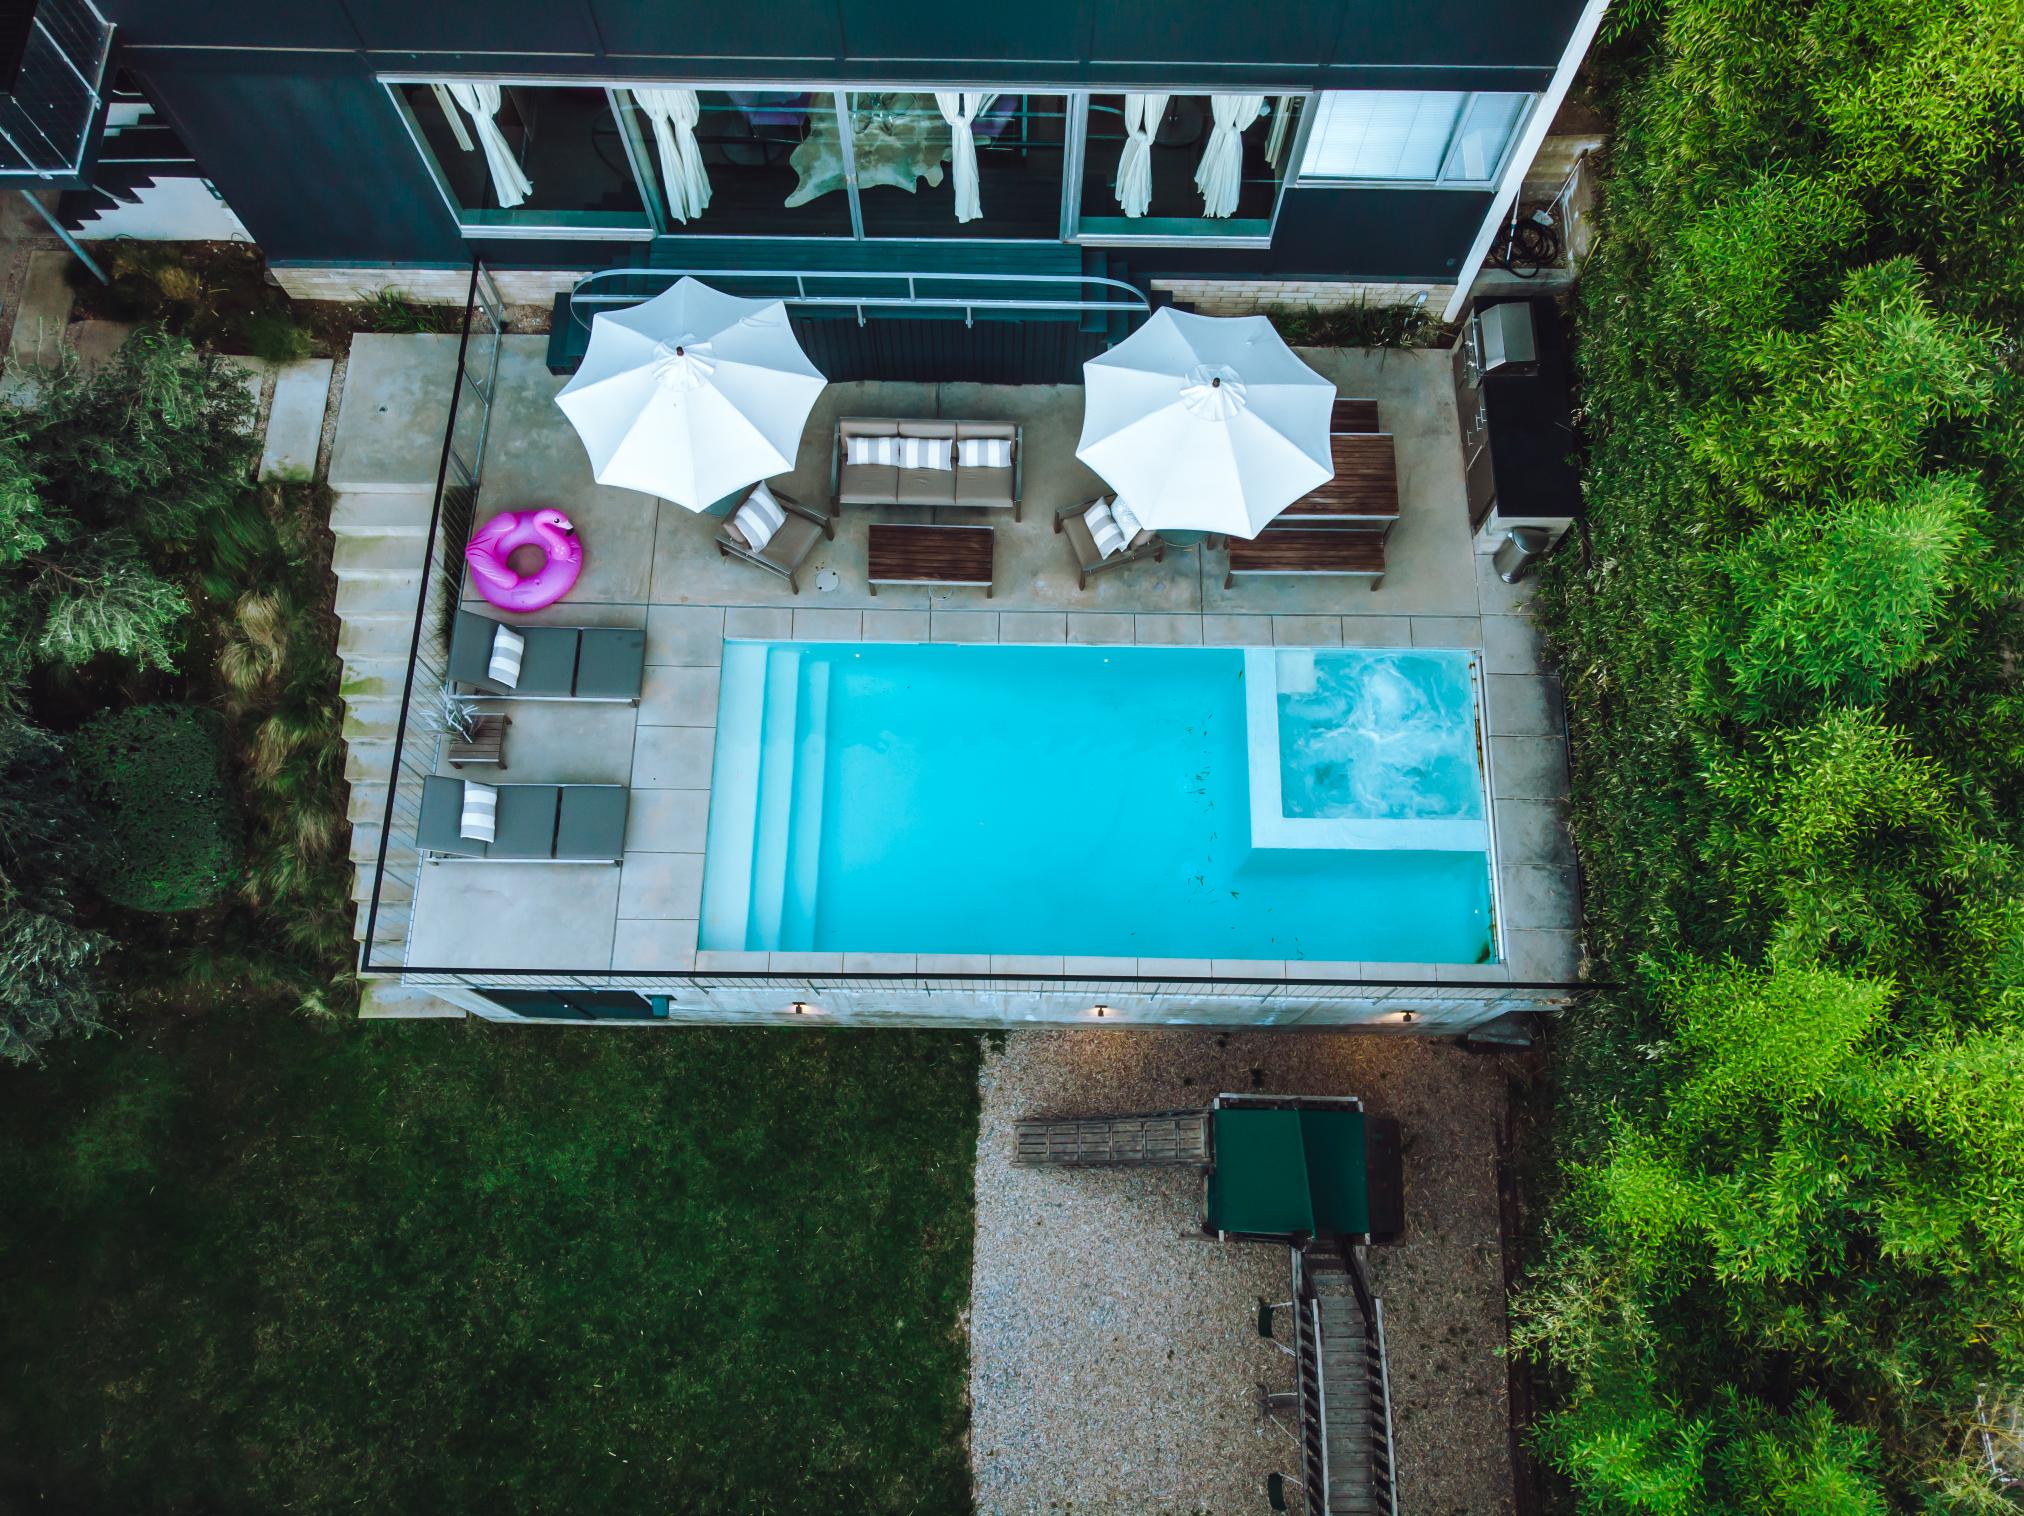 An aerial view of a pool and patio area.